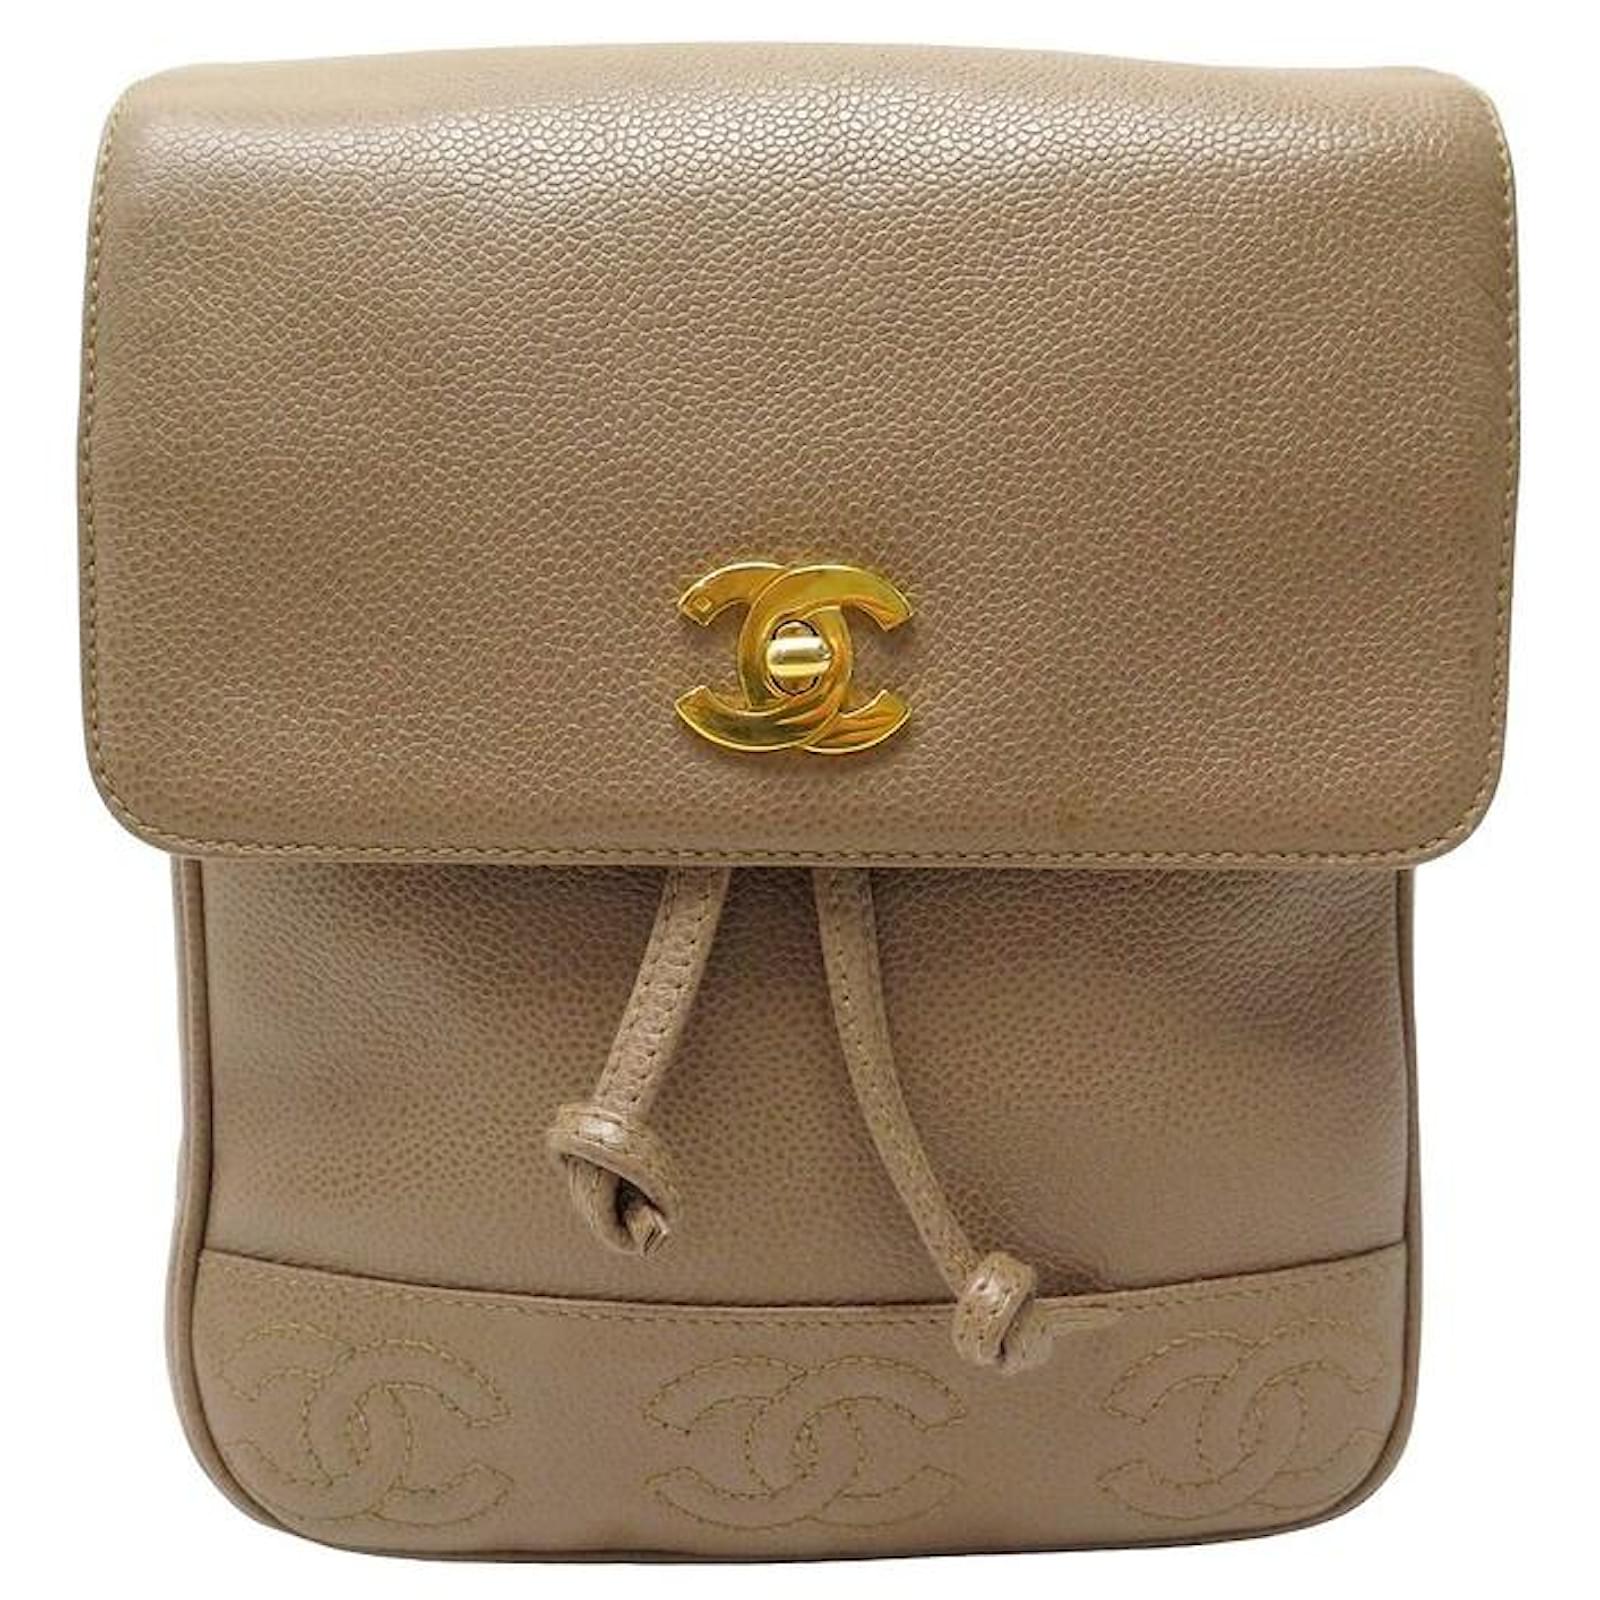 Backpacks Chanel Vintage Chanel Backpack with CC Logo Clasp in Taupe Caviar Leather Backpack Bag